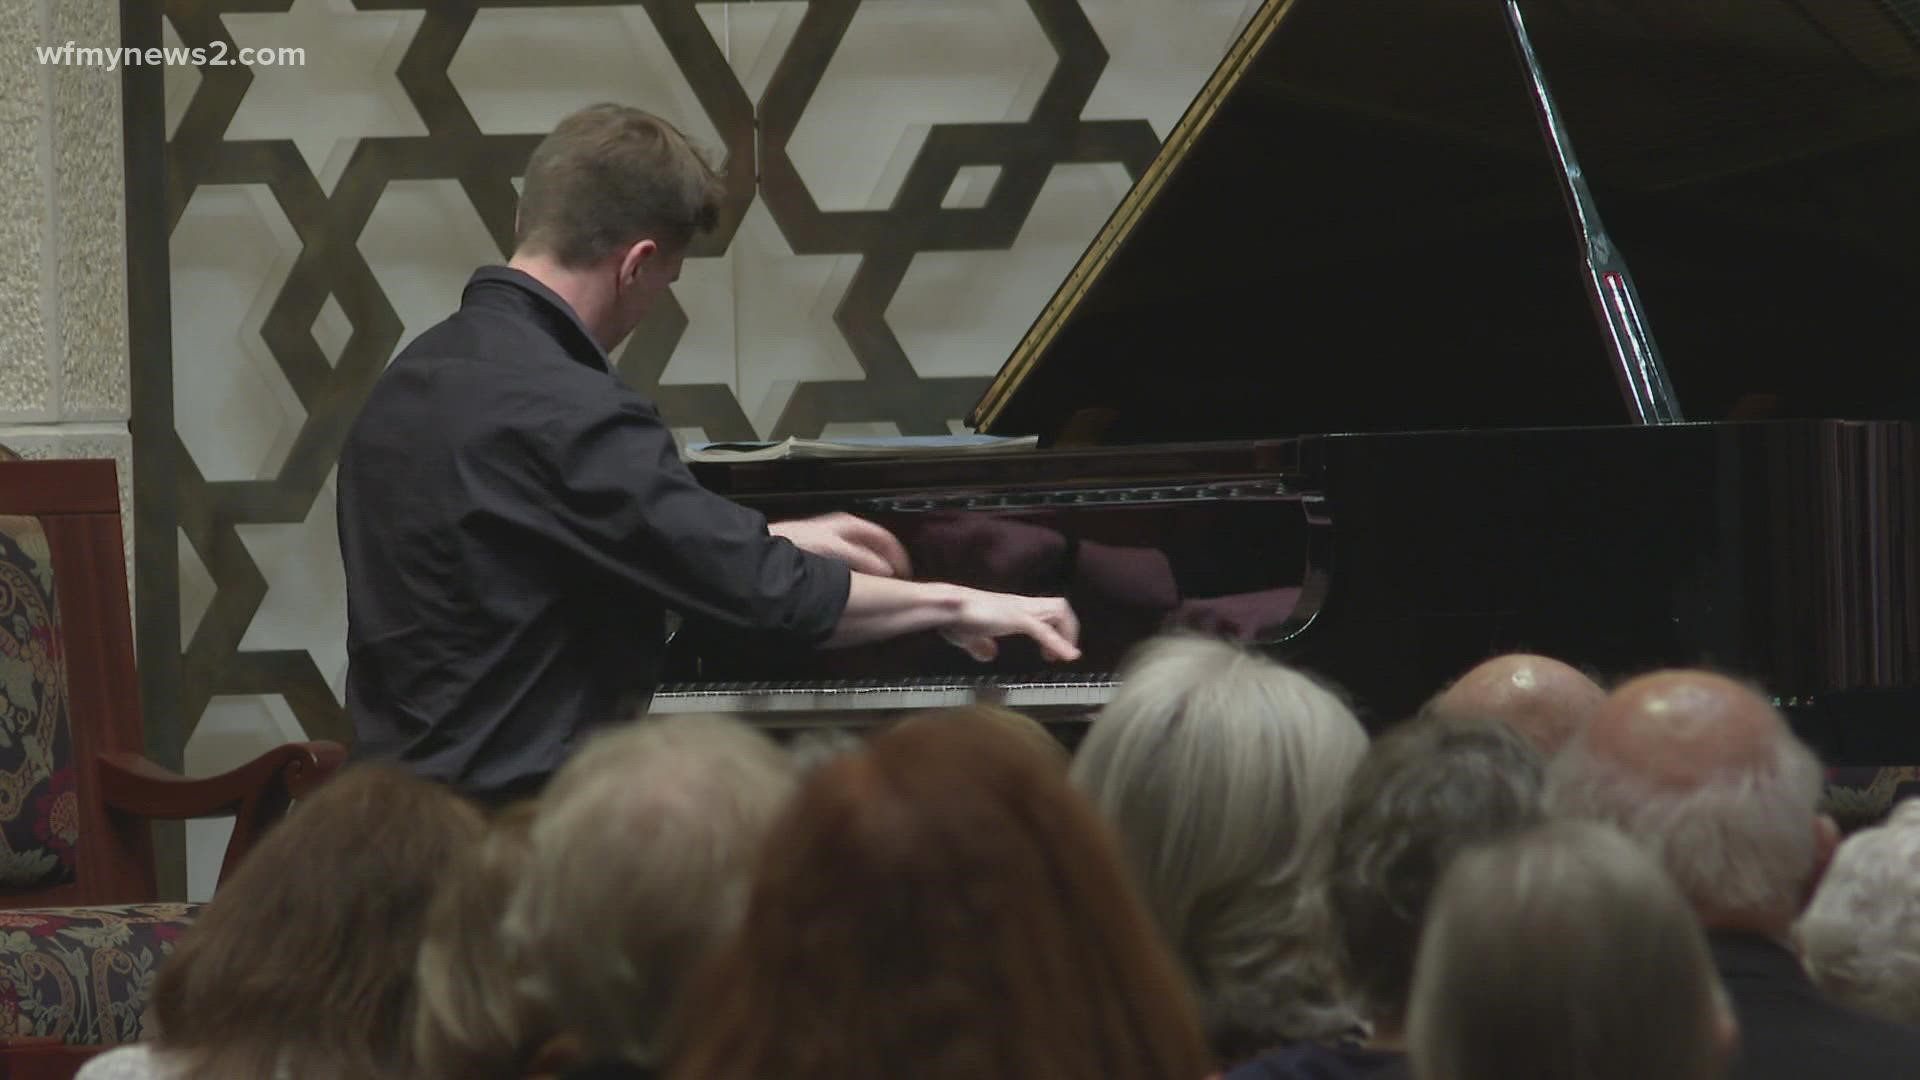 The musicians with eastern European backgrounds put on a classical music concert to raise money for people in Ukraine.